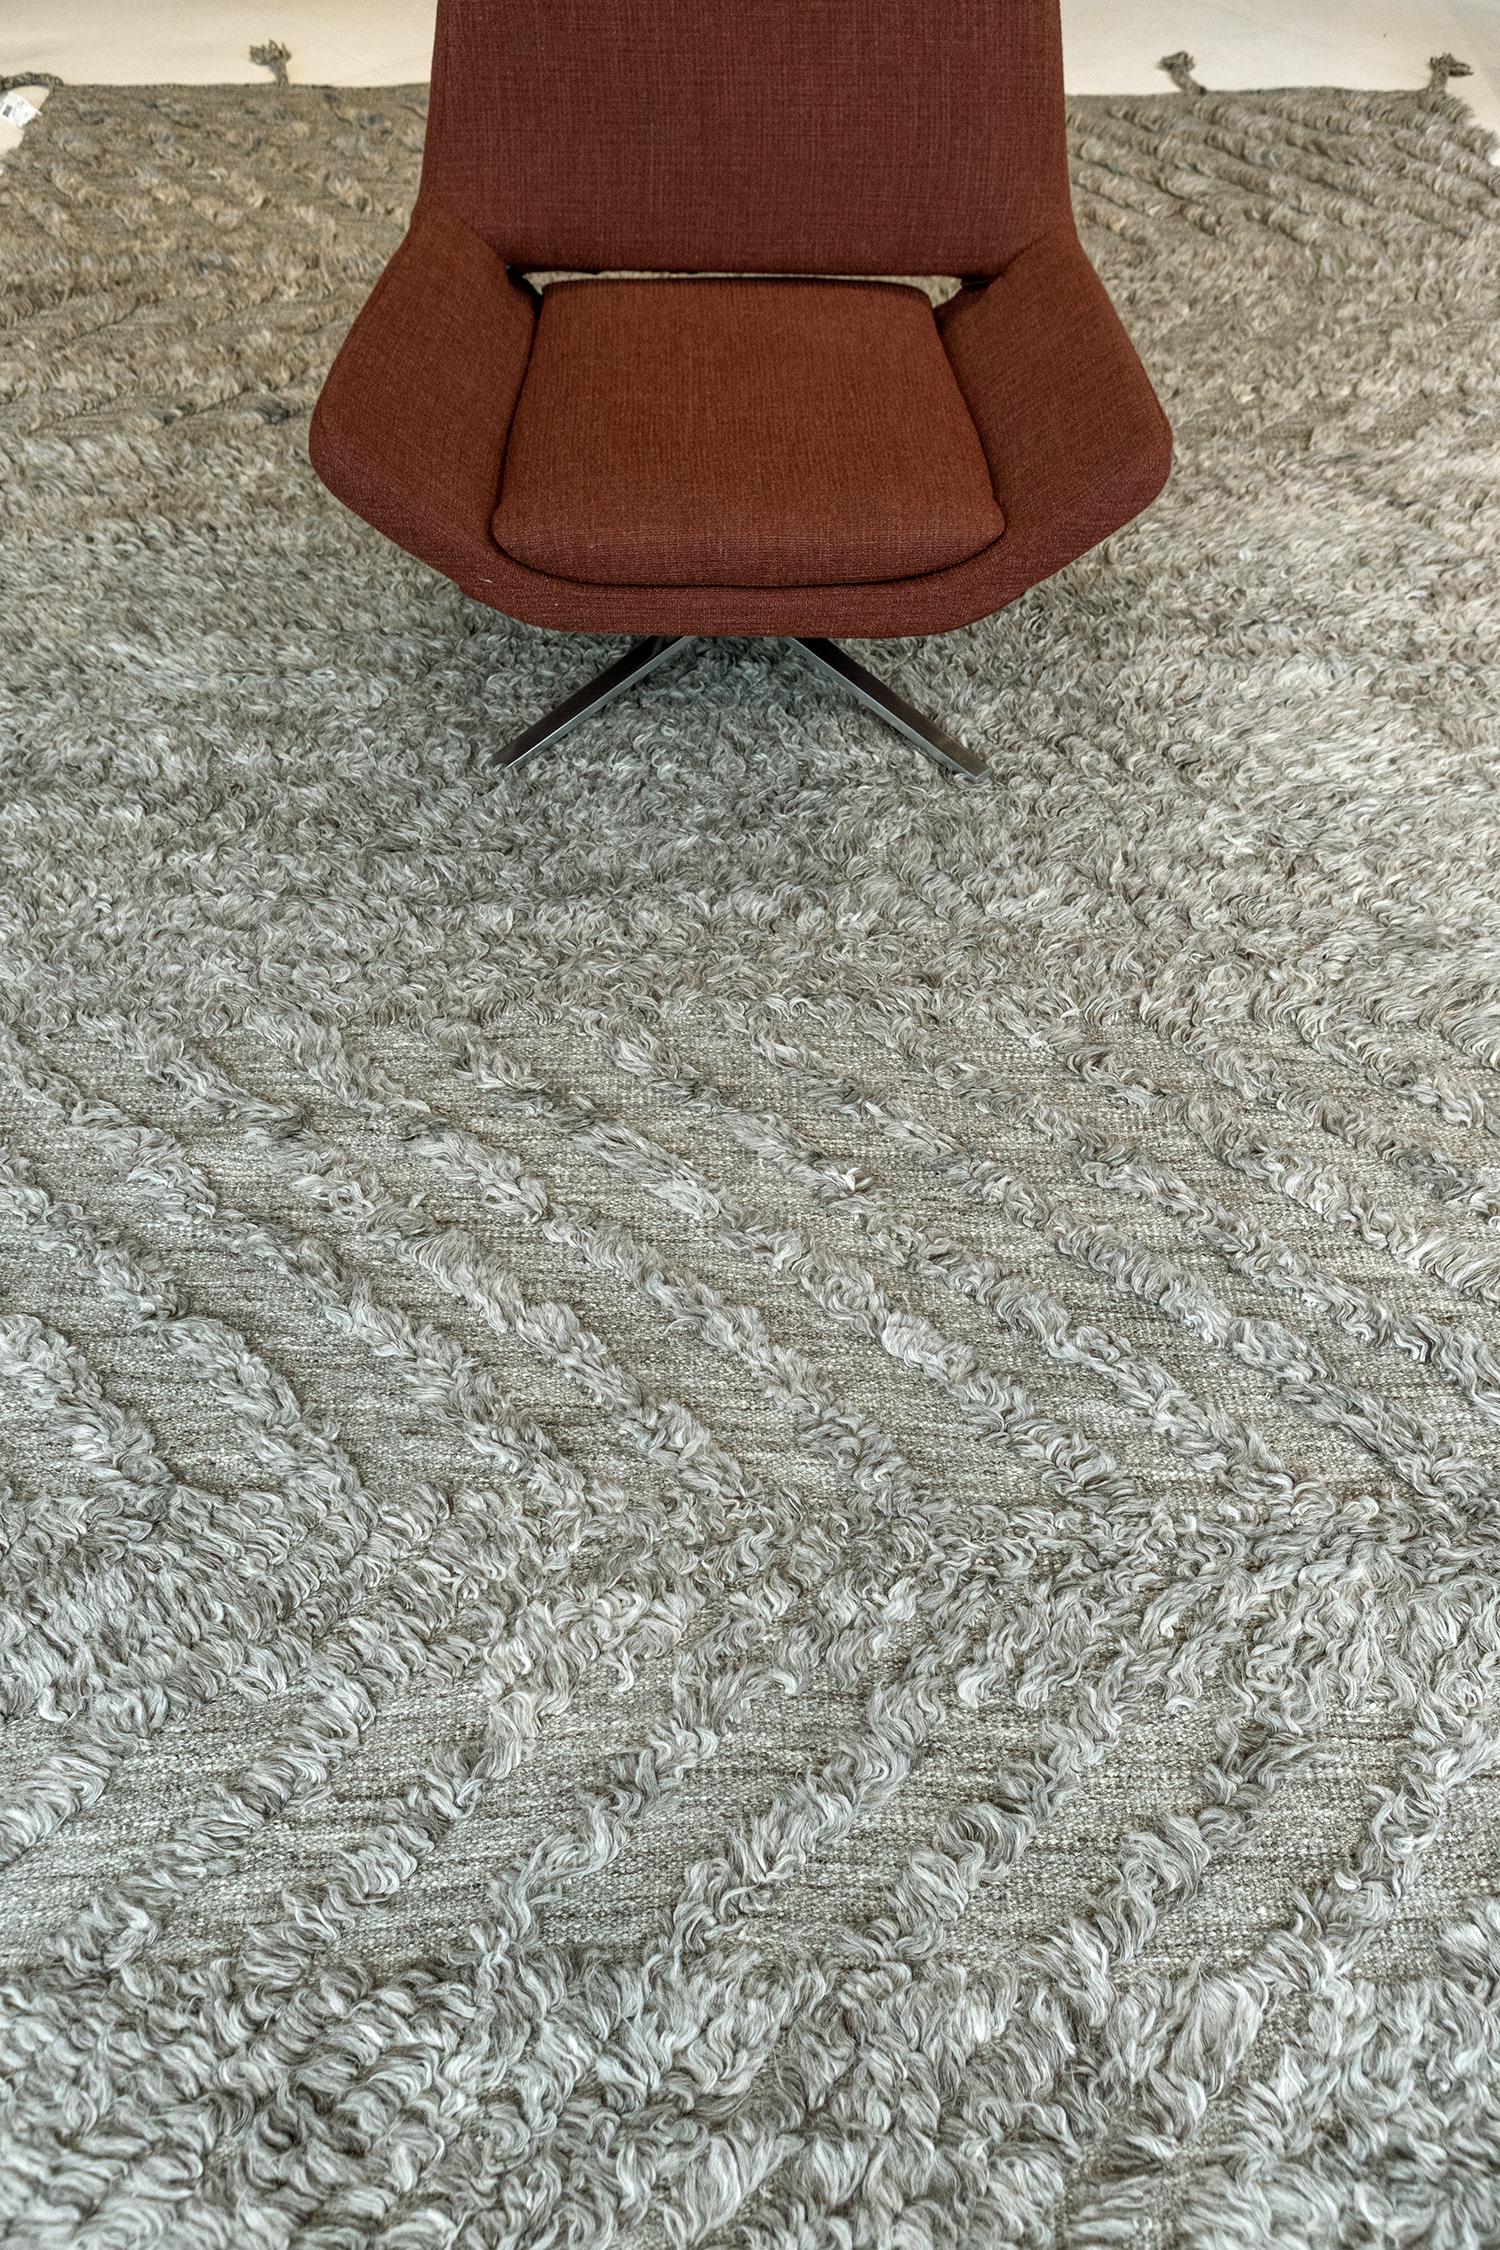 Zuma is a breathtaking rug in our Zigzigzag Collection that features myriads of lines forming zigzag motifs in an artistic manner. Overlaying in a plush gray field, this rug gives a space a charming and inviting feel. Every element of the piece,